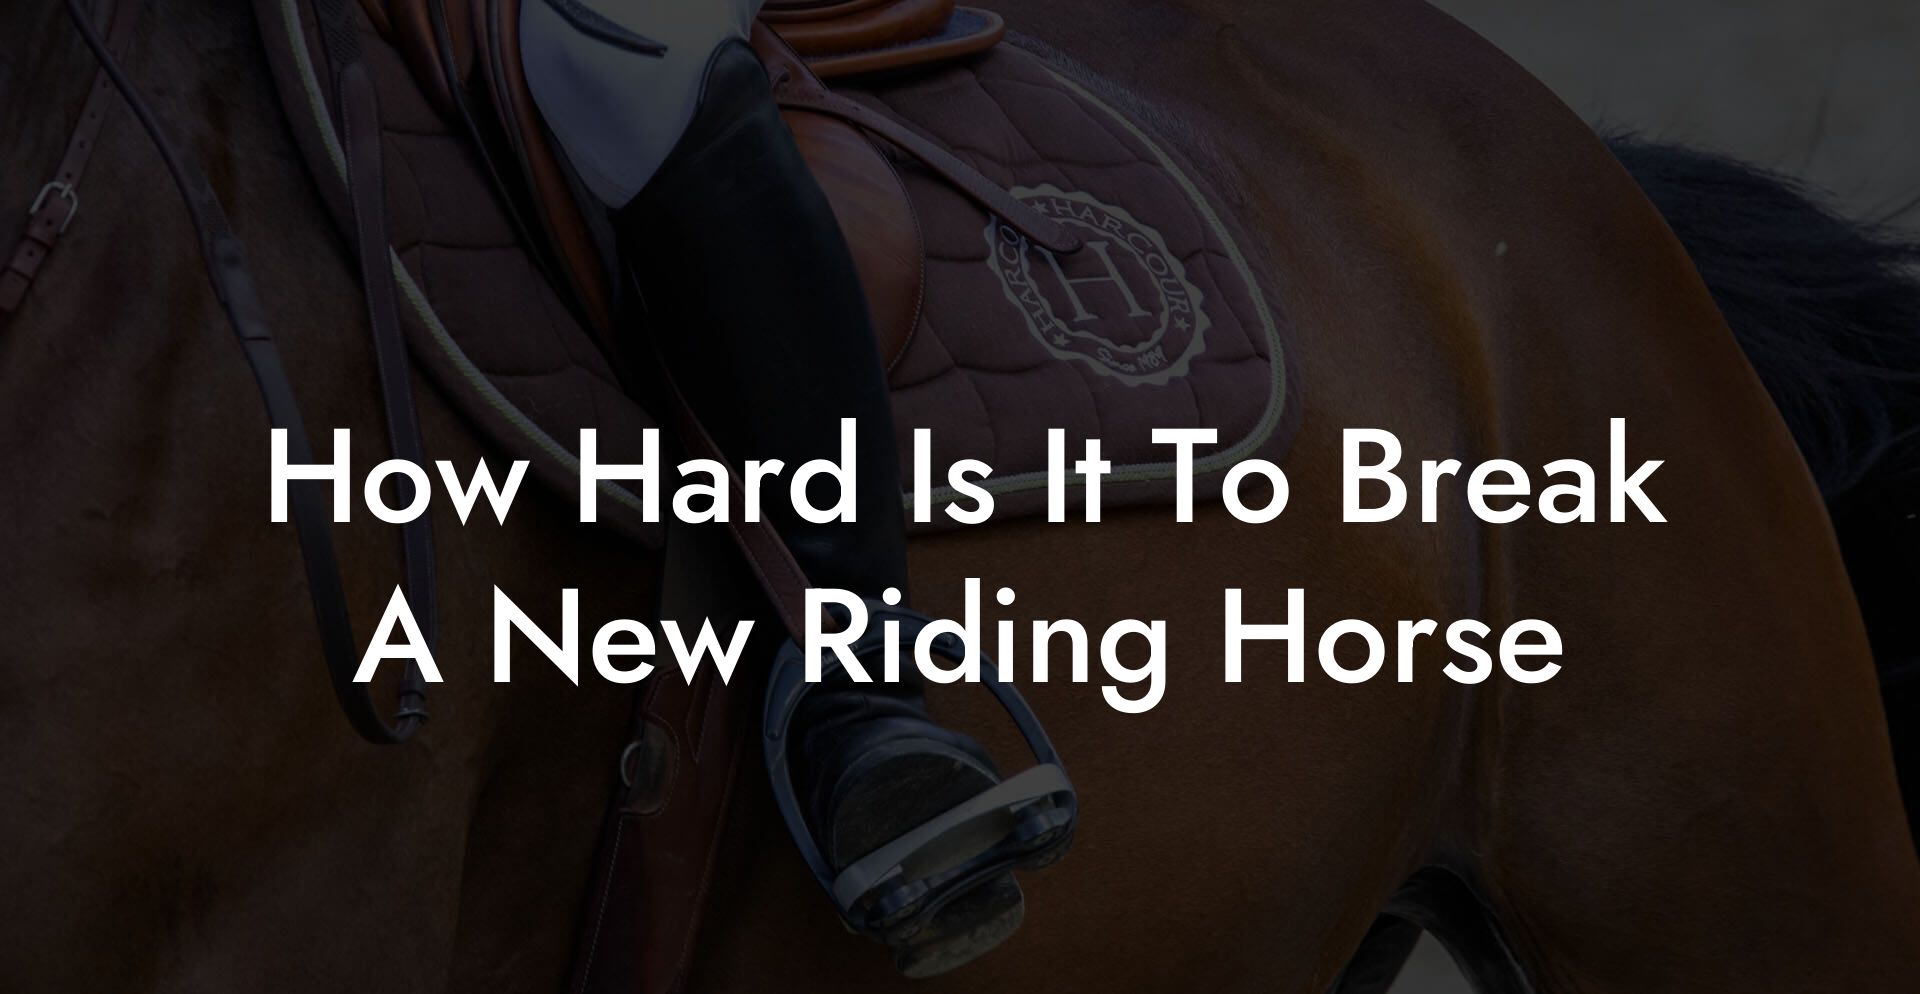 How Hard Is It To Break A New Riding Horse